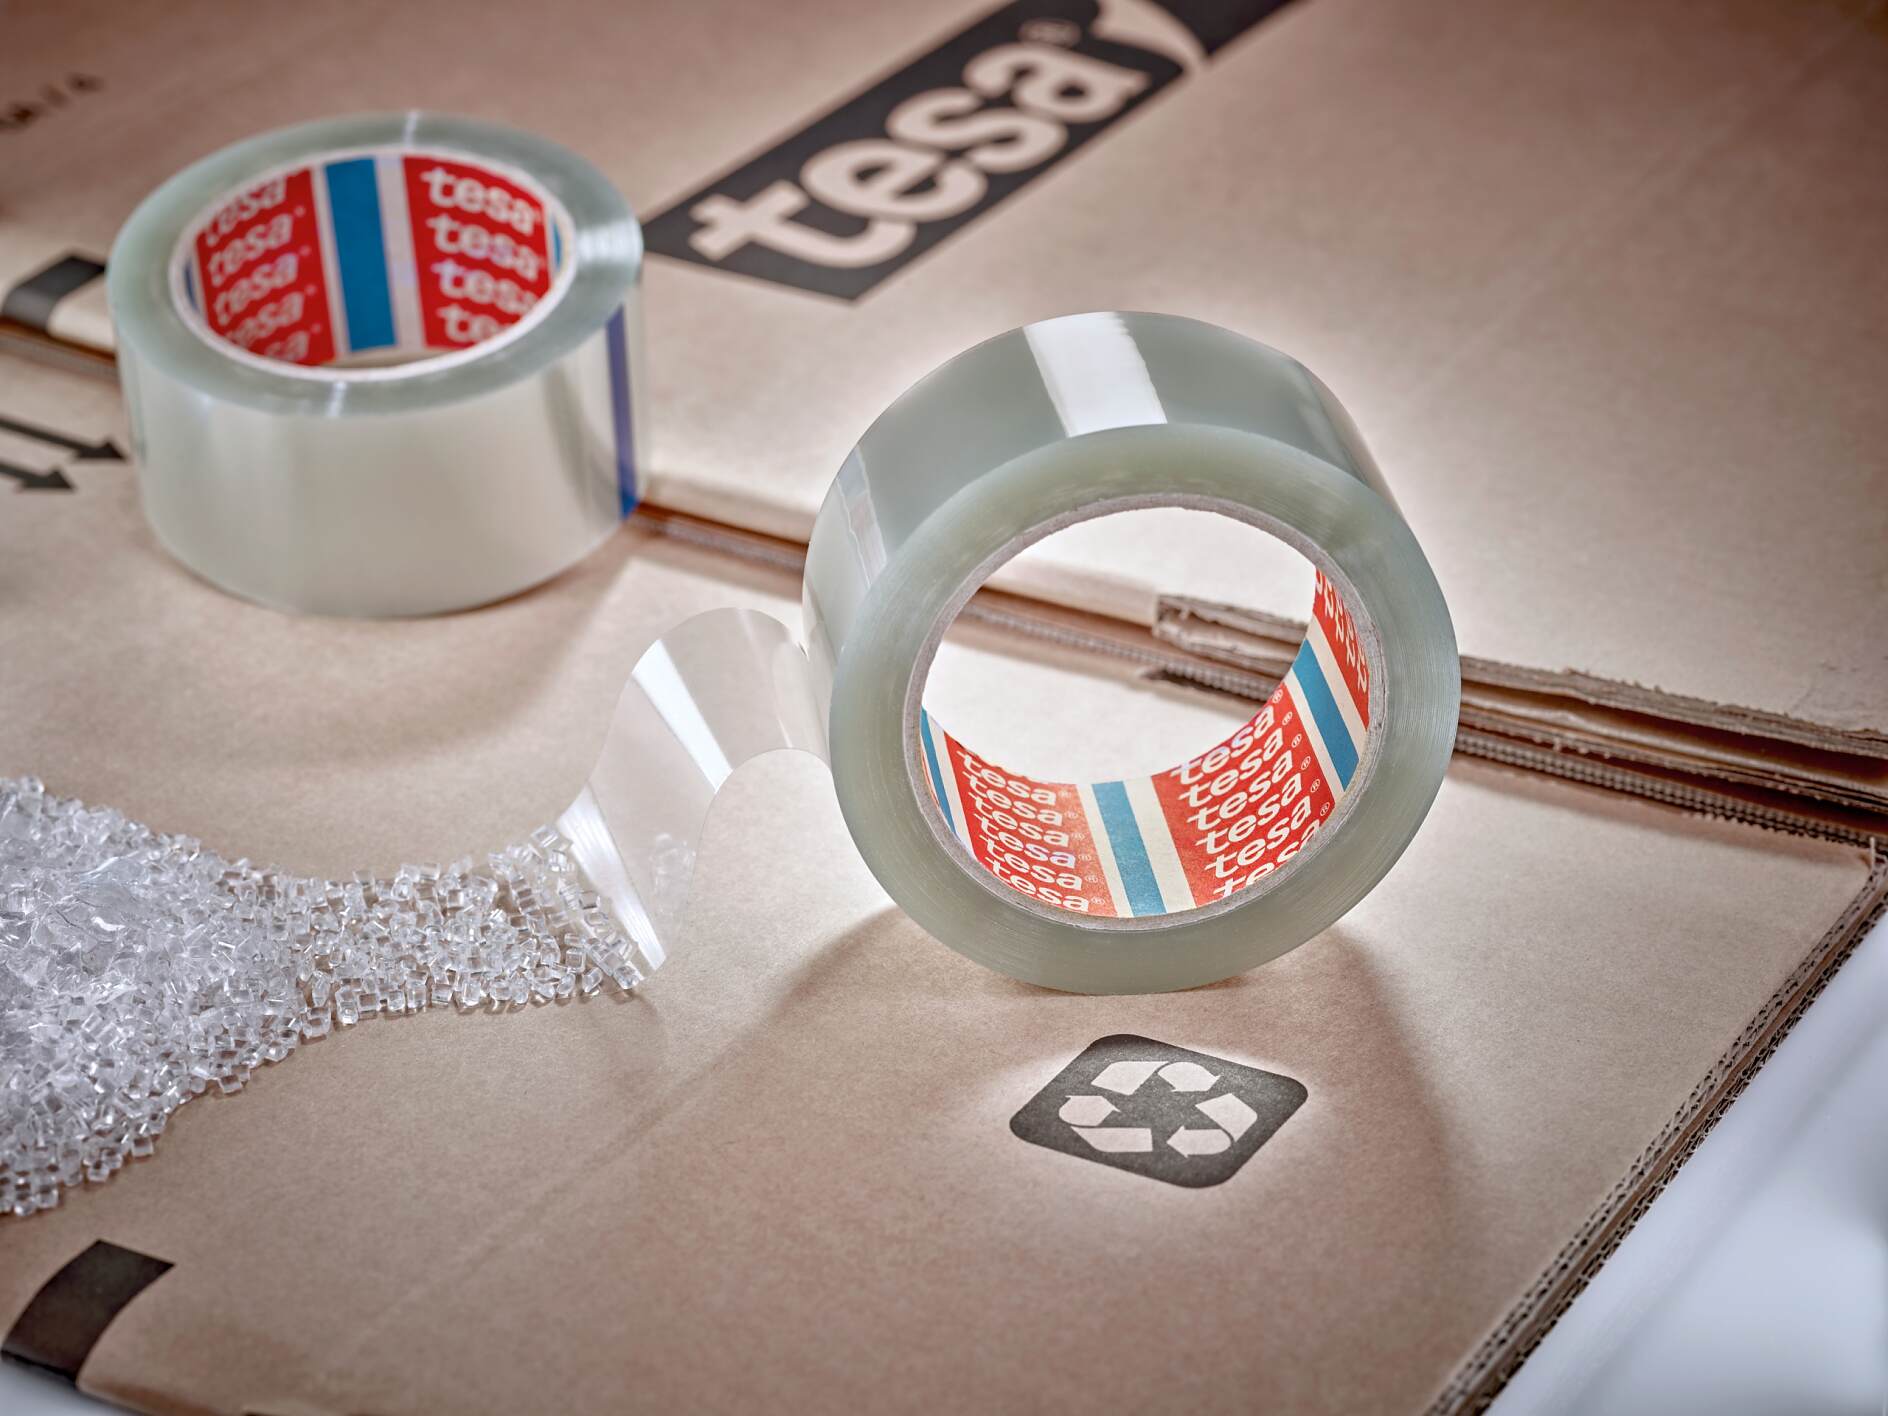 TESA ASSA ABLOY opts for eco-friendly packaging